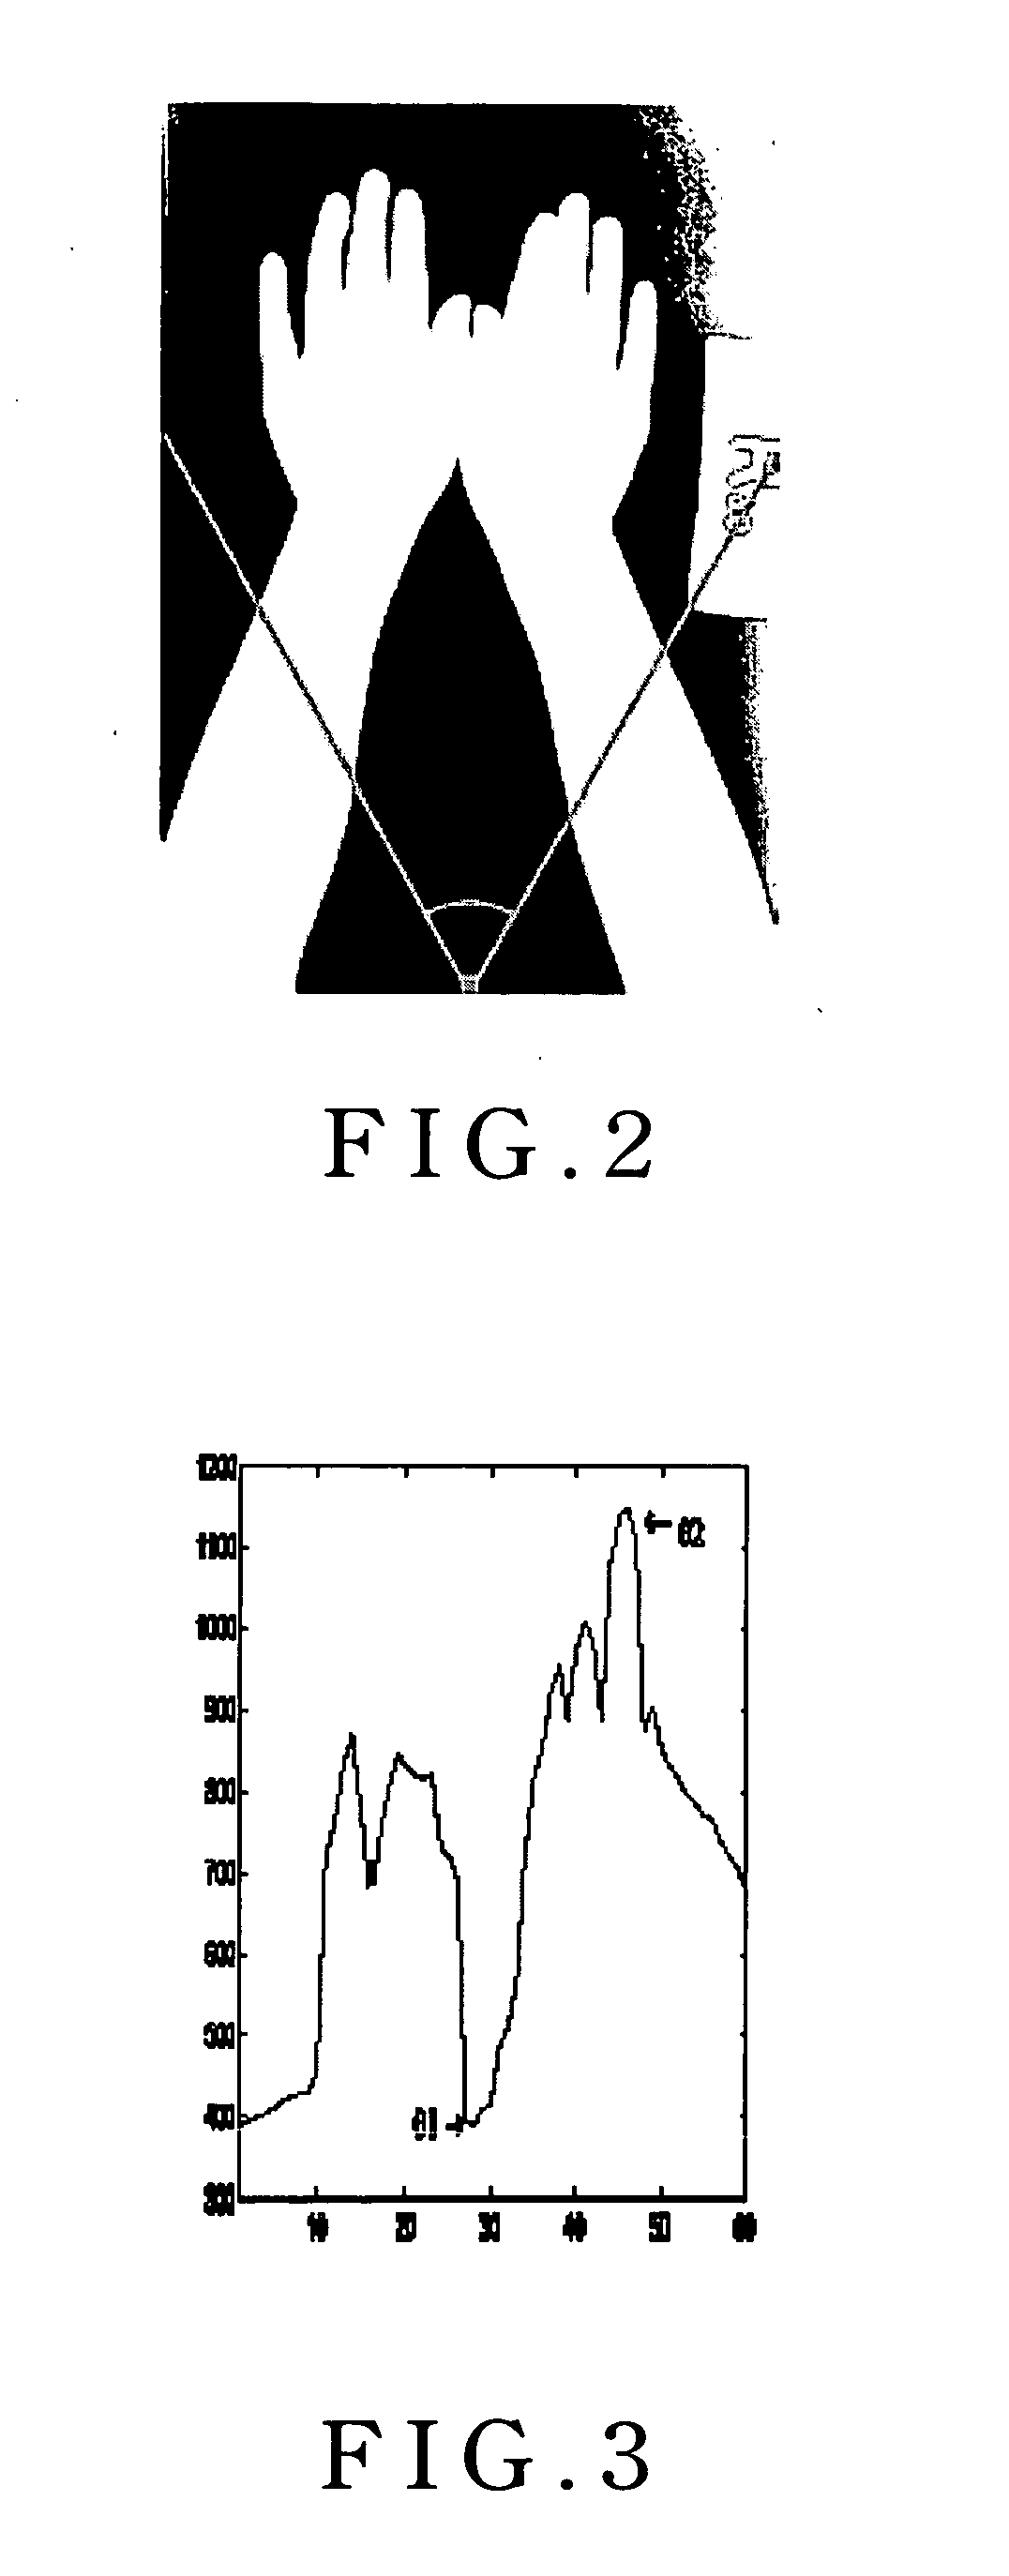 Method of automatically assessing skeletal age of hand radiographs